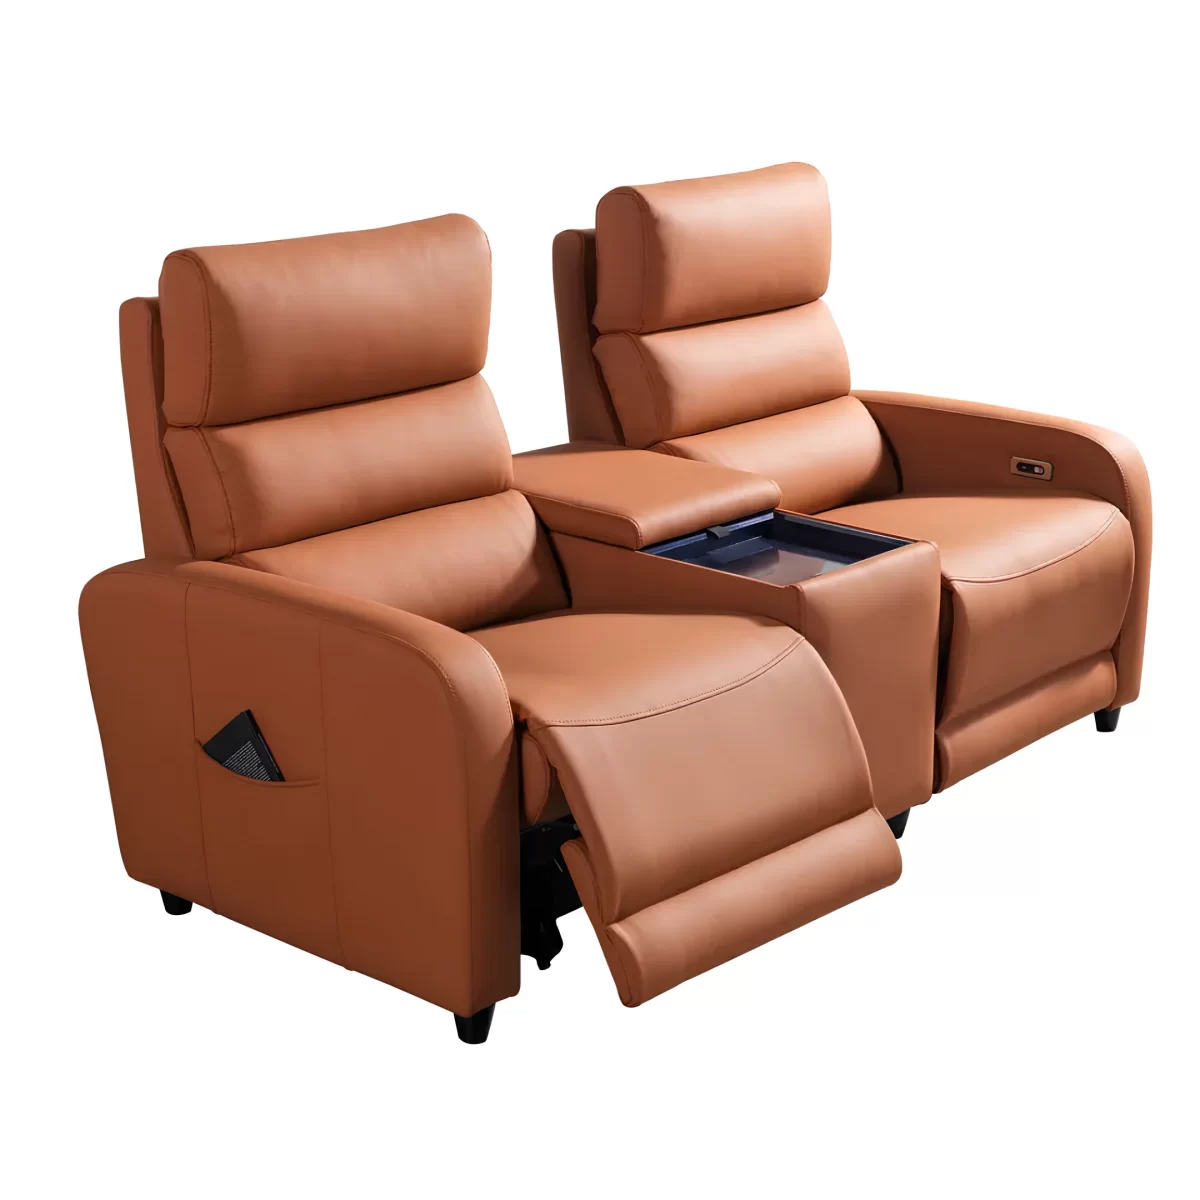 mari double reclining sofa electric recliner seat for home theater